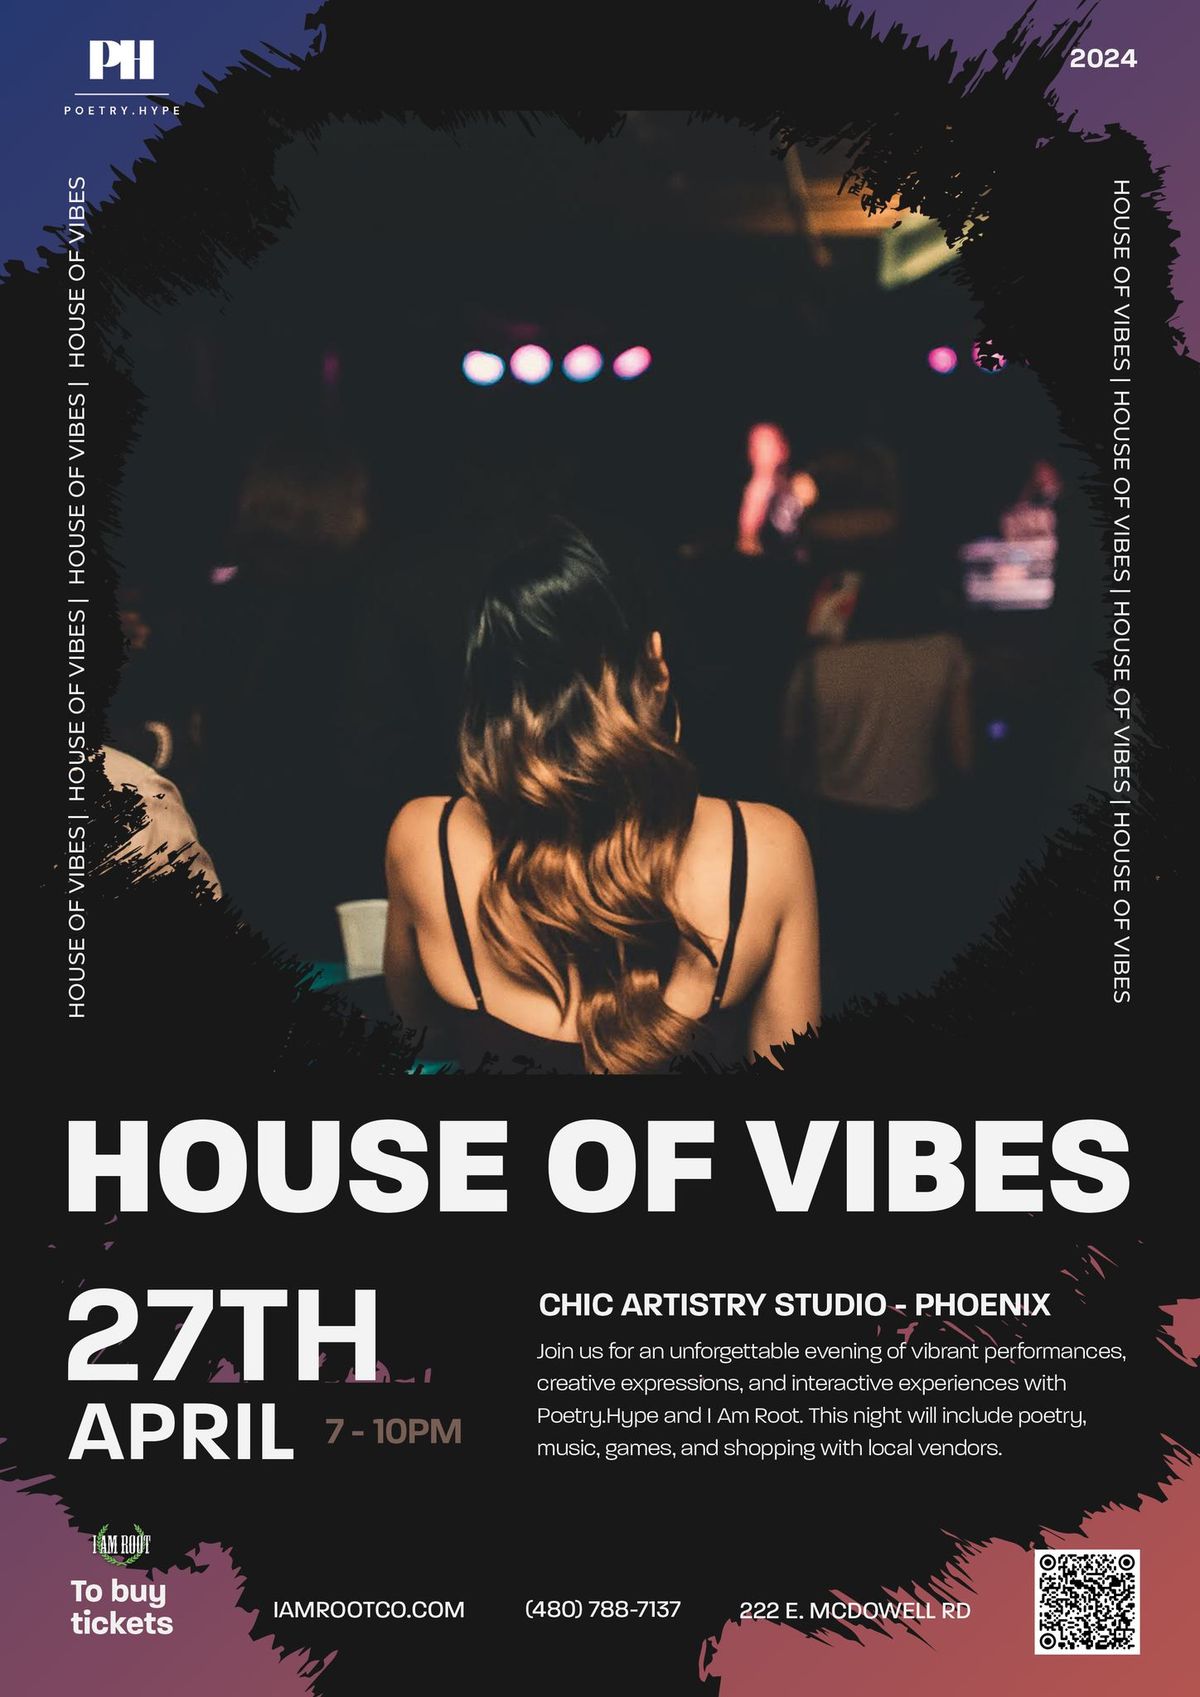 Poetry.Hype presents House of Vibes